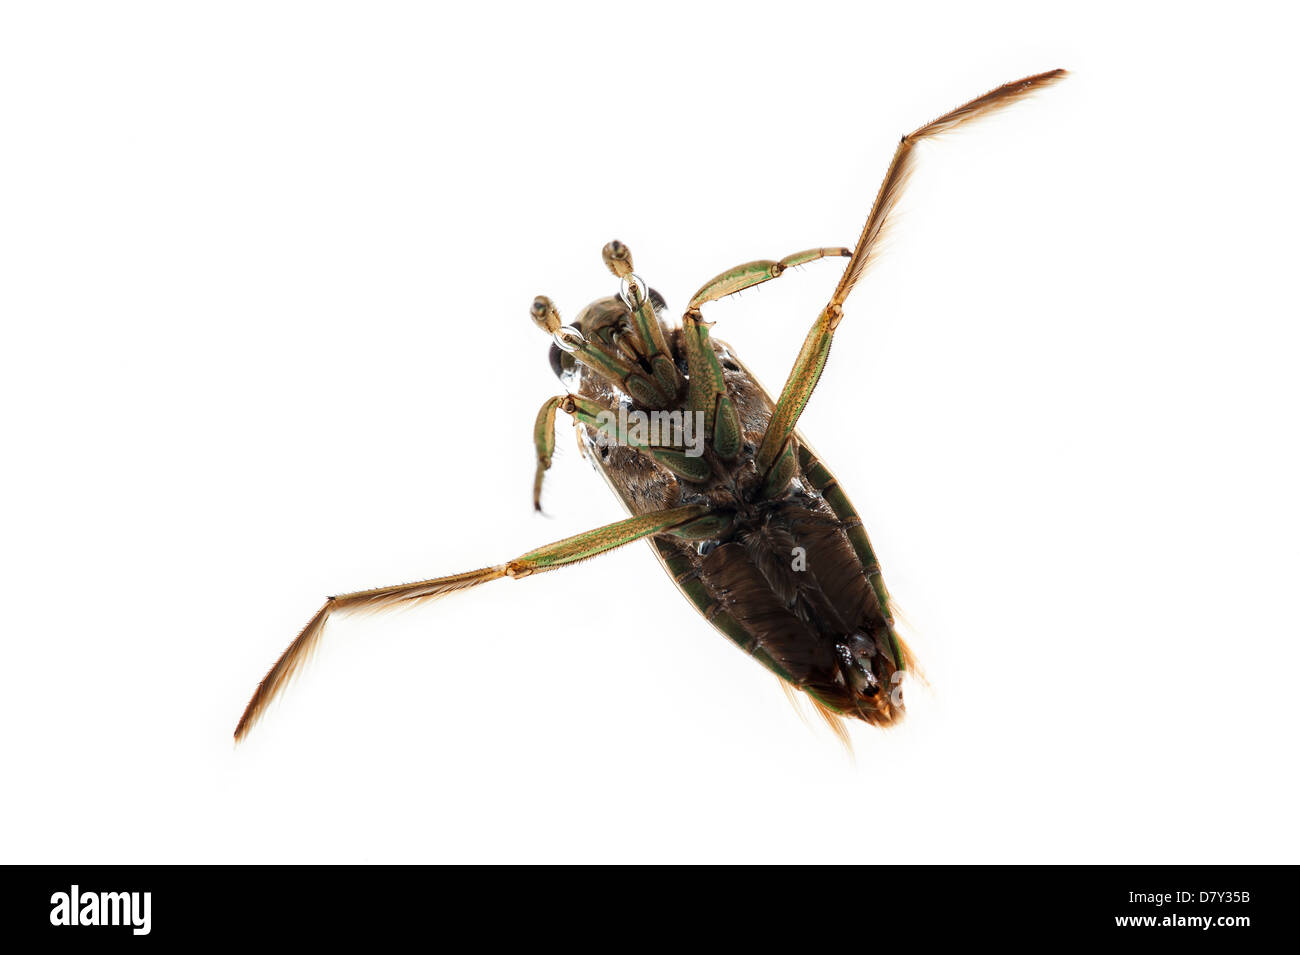 Spotted backswimmer / Mottled backswimmer / Peppered water boatman (Notonecta maculata) on white background Stock Photo